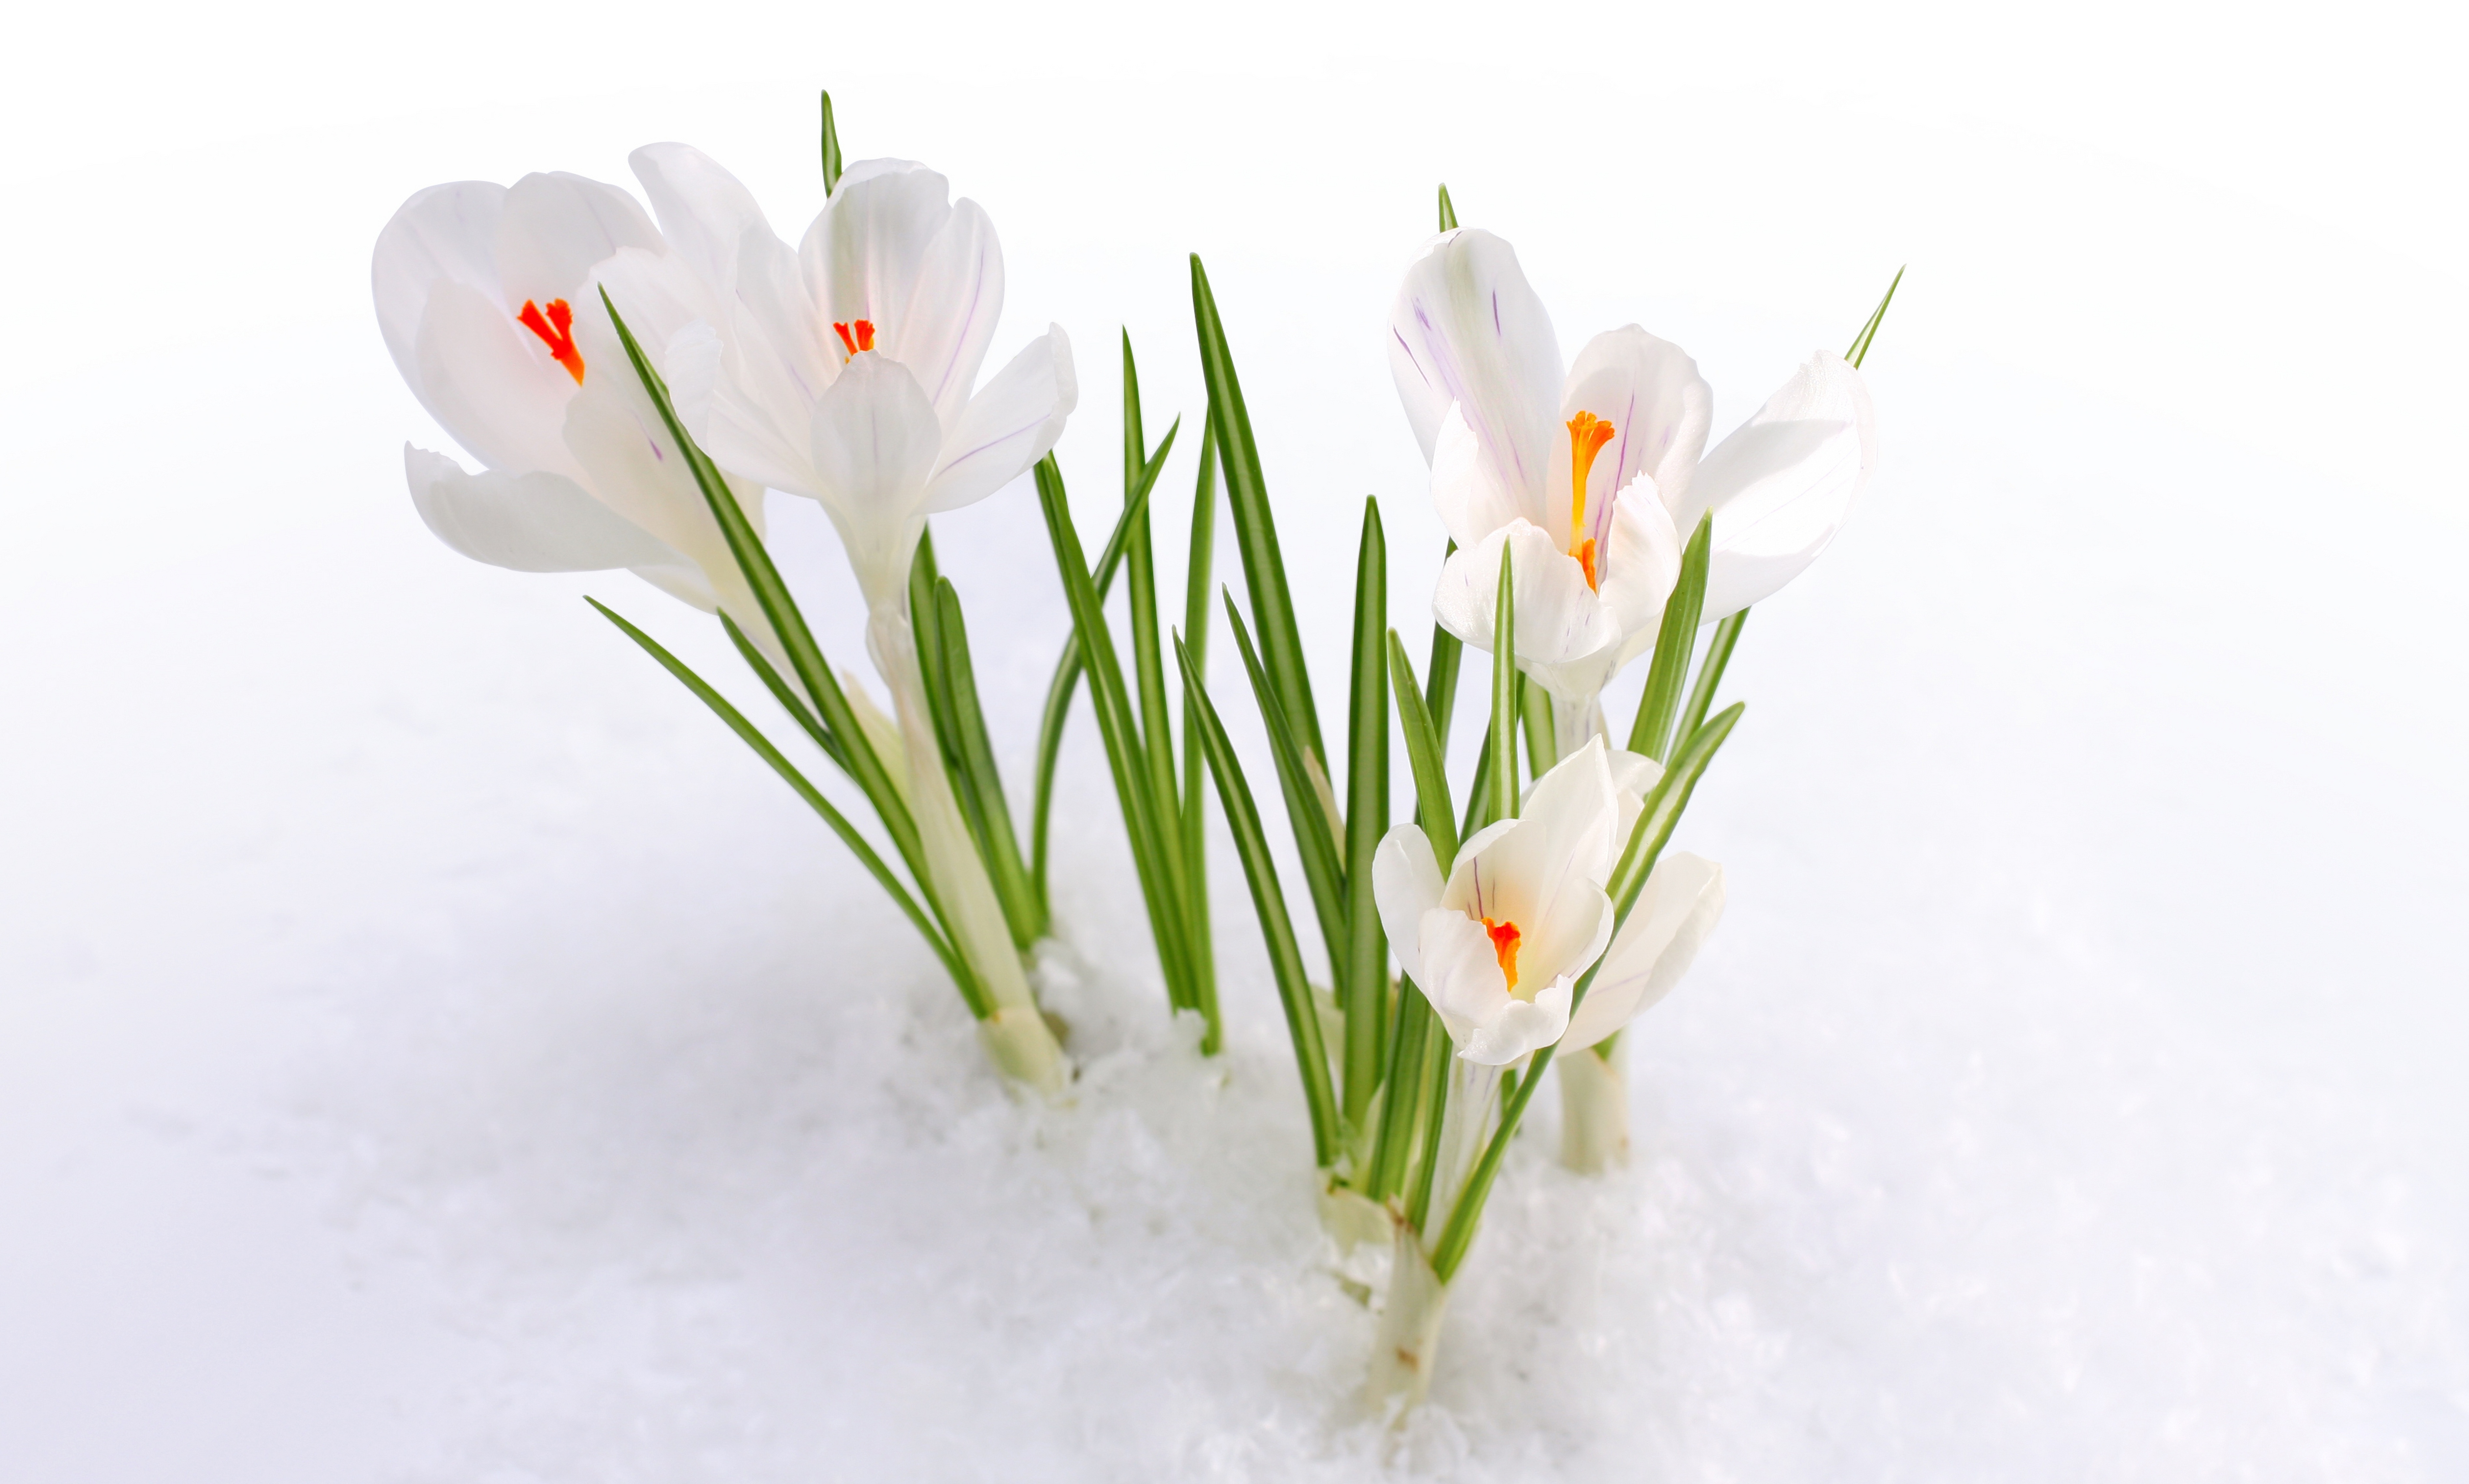 Snow, Snowdrops, Spring Flowers, Early Spring Wallpapers - С 1 Днем Весны , HD Wallpaper & Backgrounds